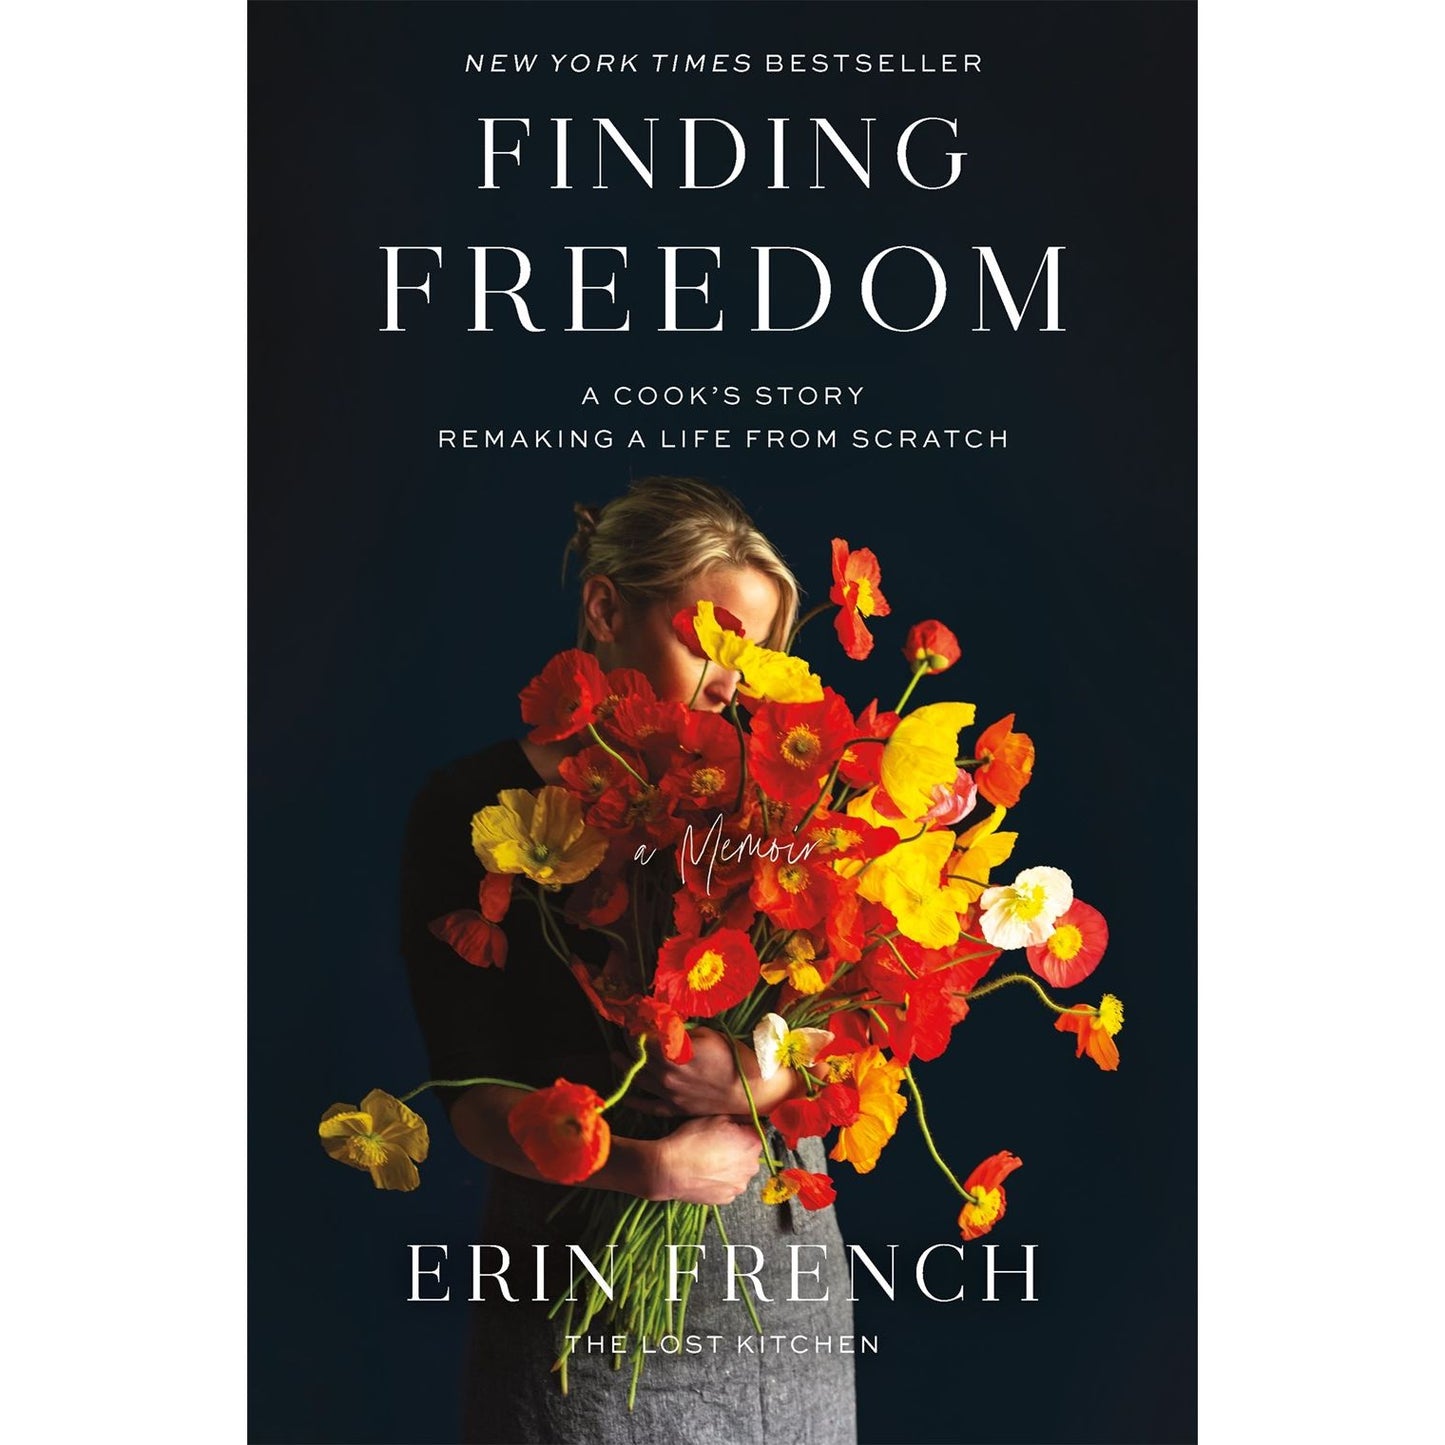 Finding Freedom (Erin French)